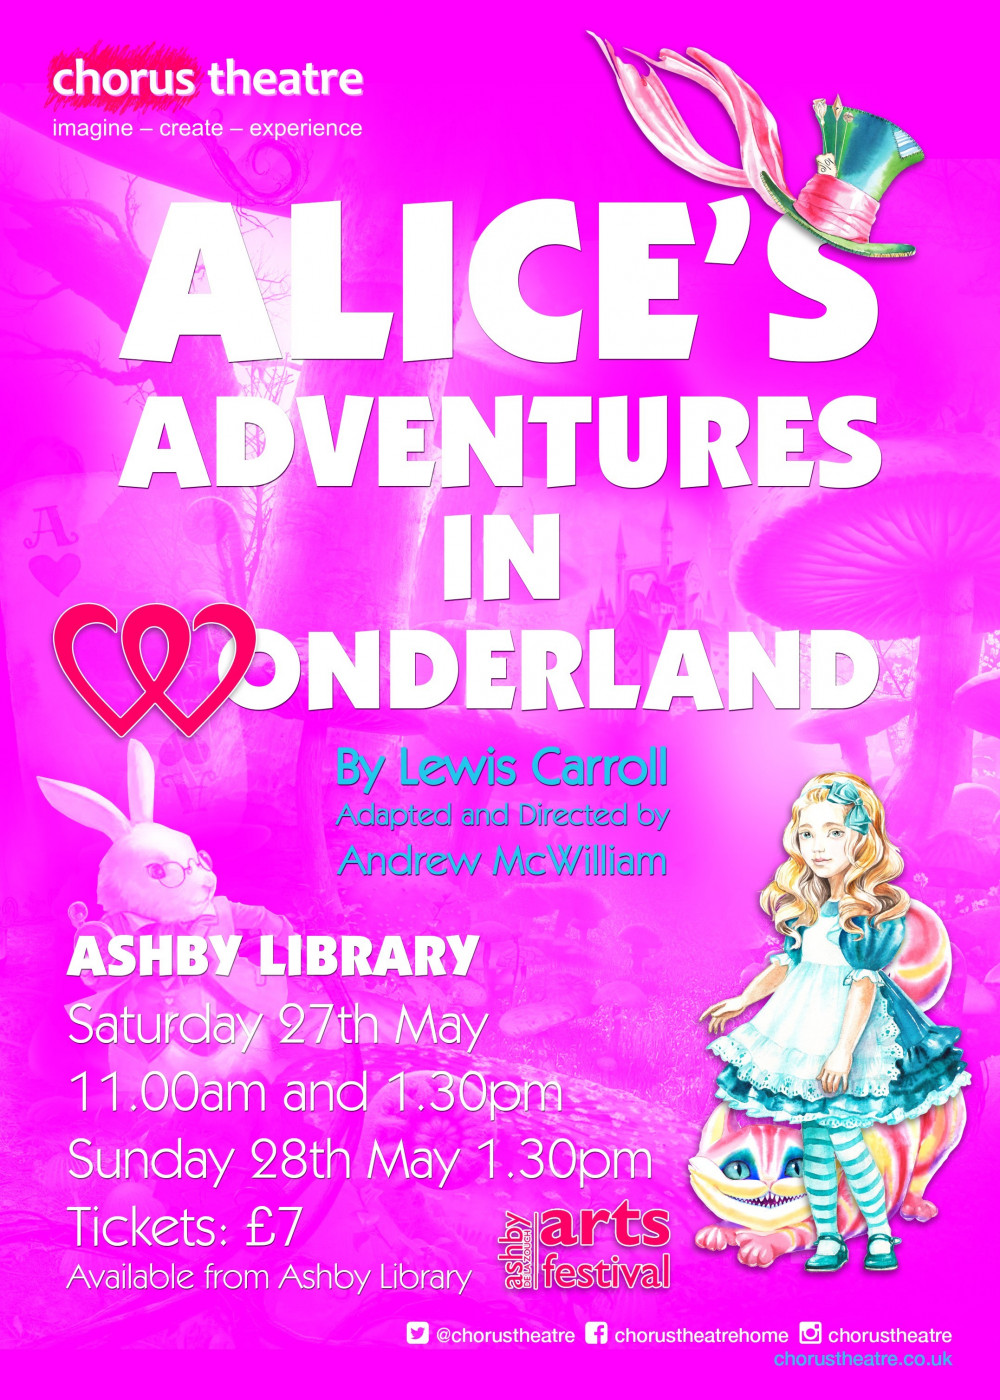 Alice's Adventures in Wonderland at Ashby Library, North Street, Ashby-de-la-Zouch